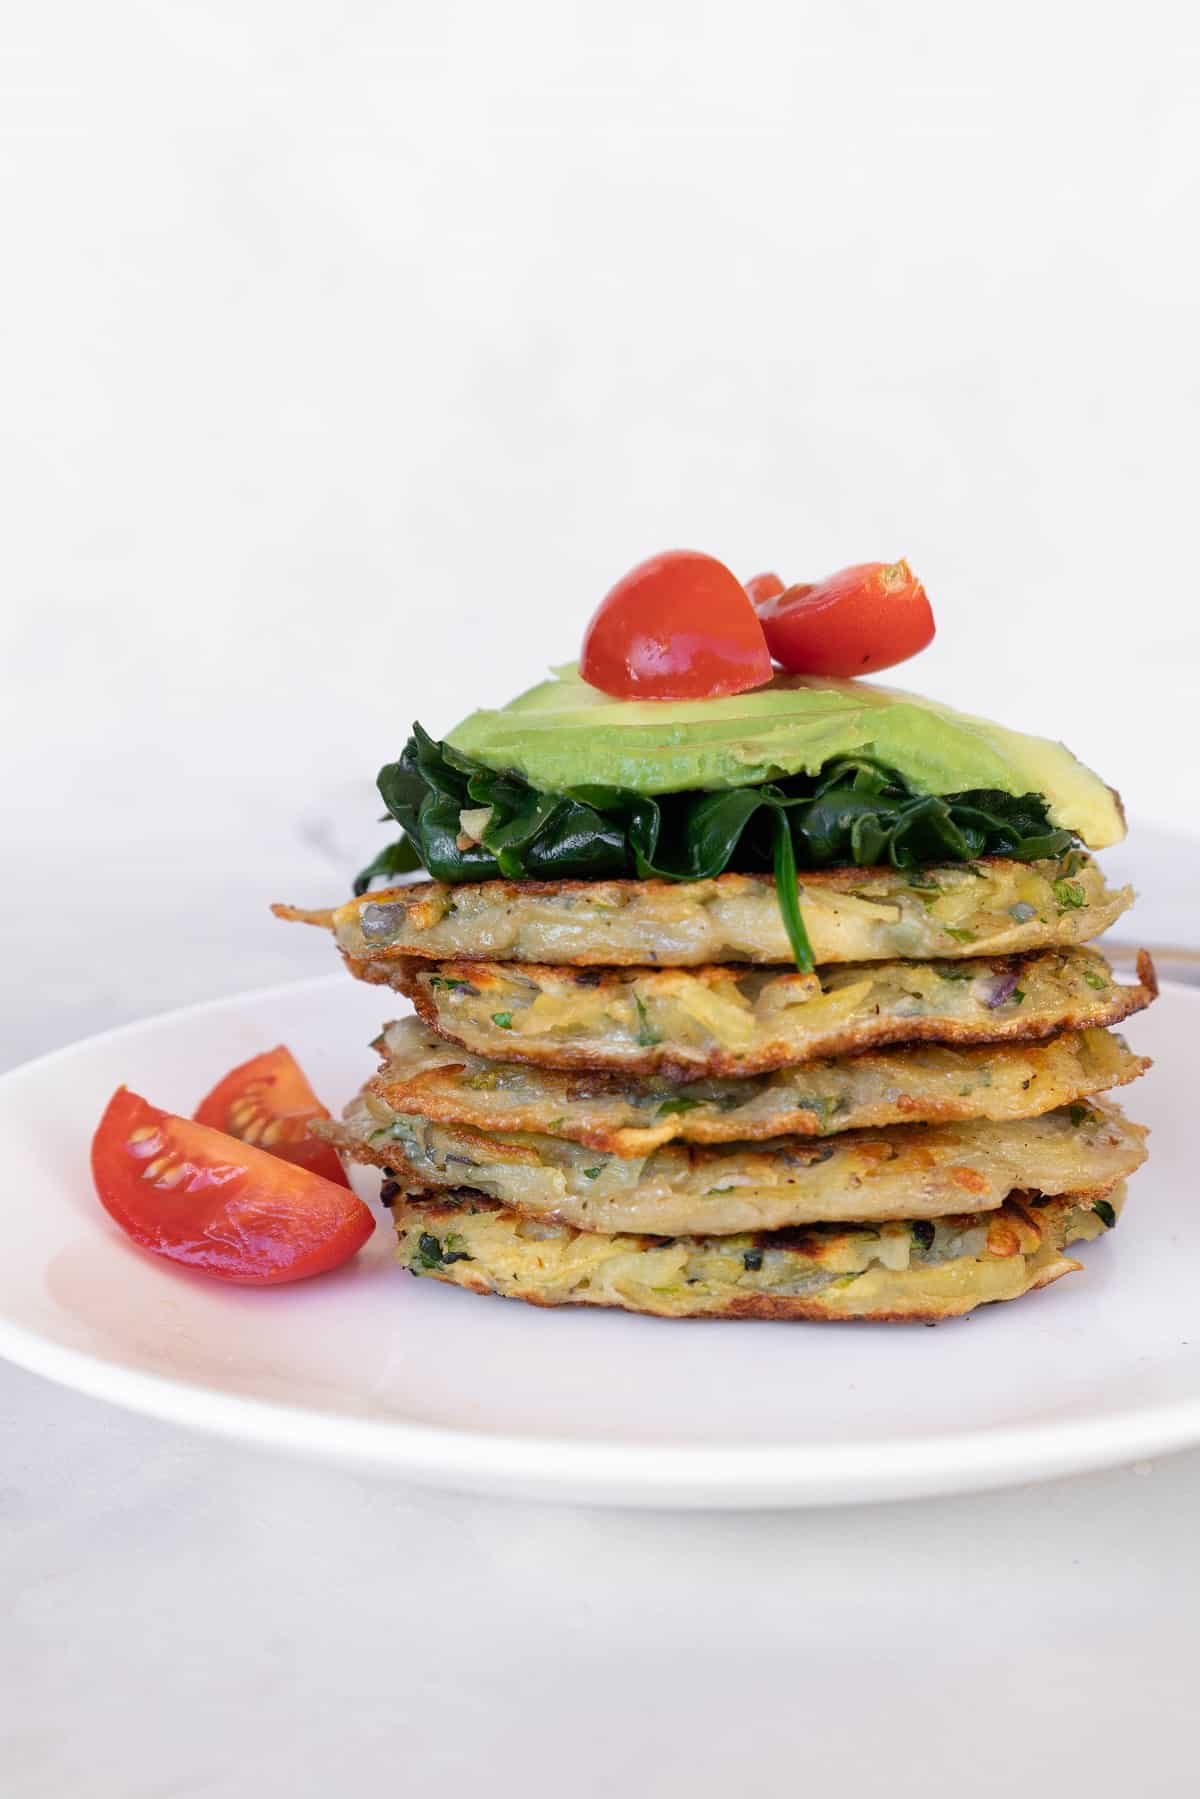 Potato fritters (gluten-free) stacked with spinach, avocado and cherry tomatoes